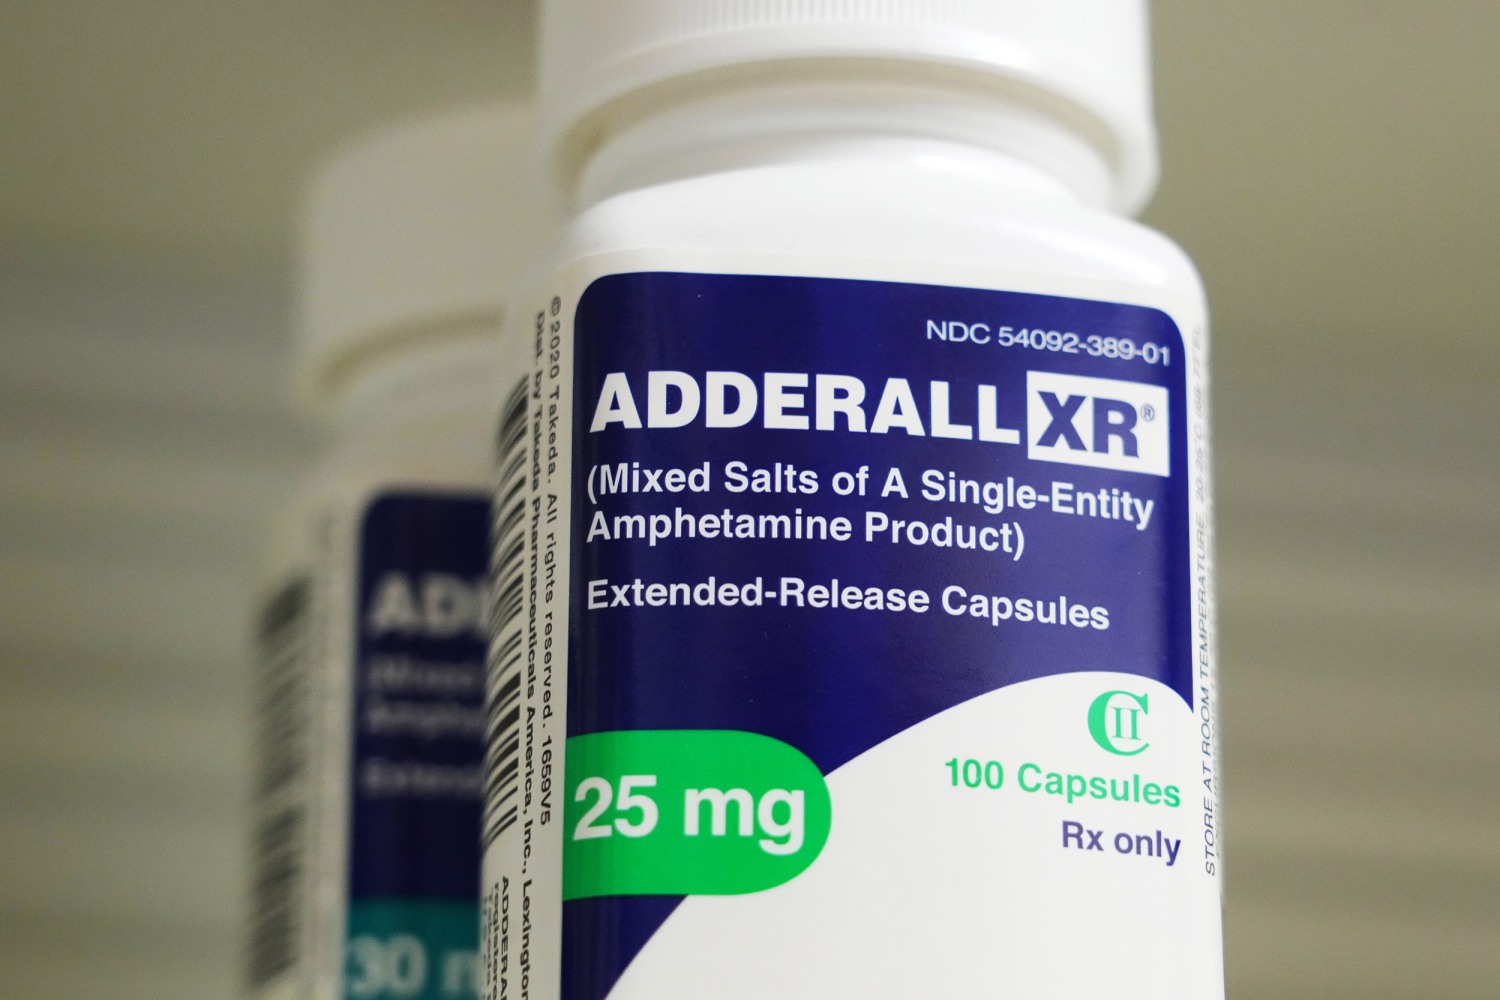 Modafinil Vs Adderall: Performance And Effects